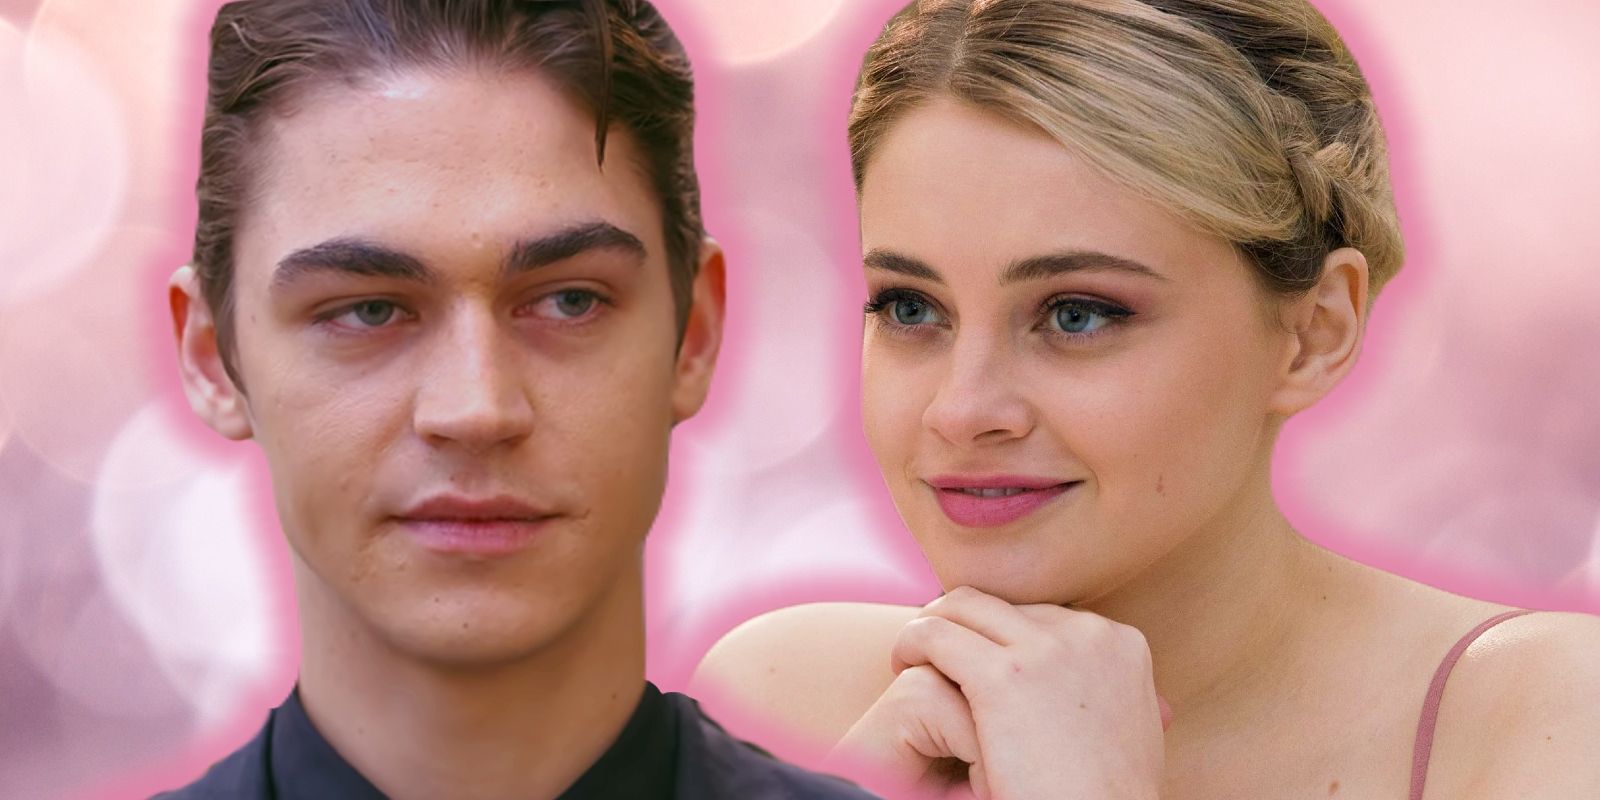 This collage shows Hardin and Tessa in front of a light pink background in After Everything.